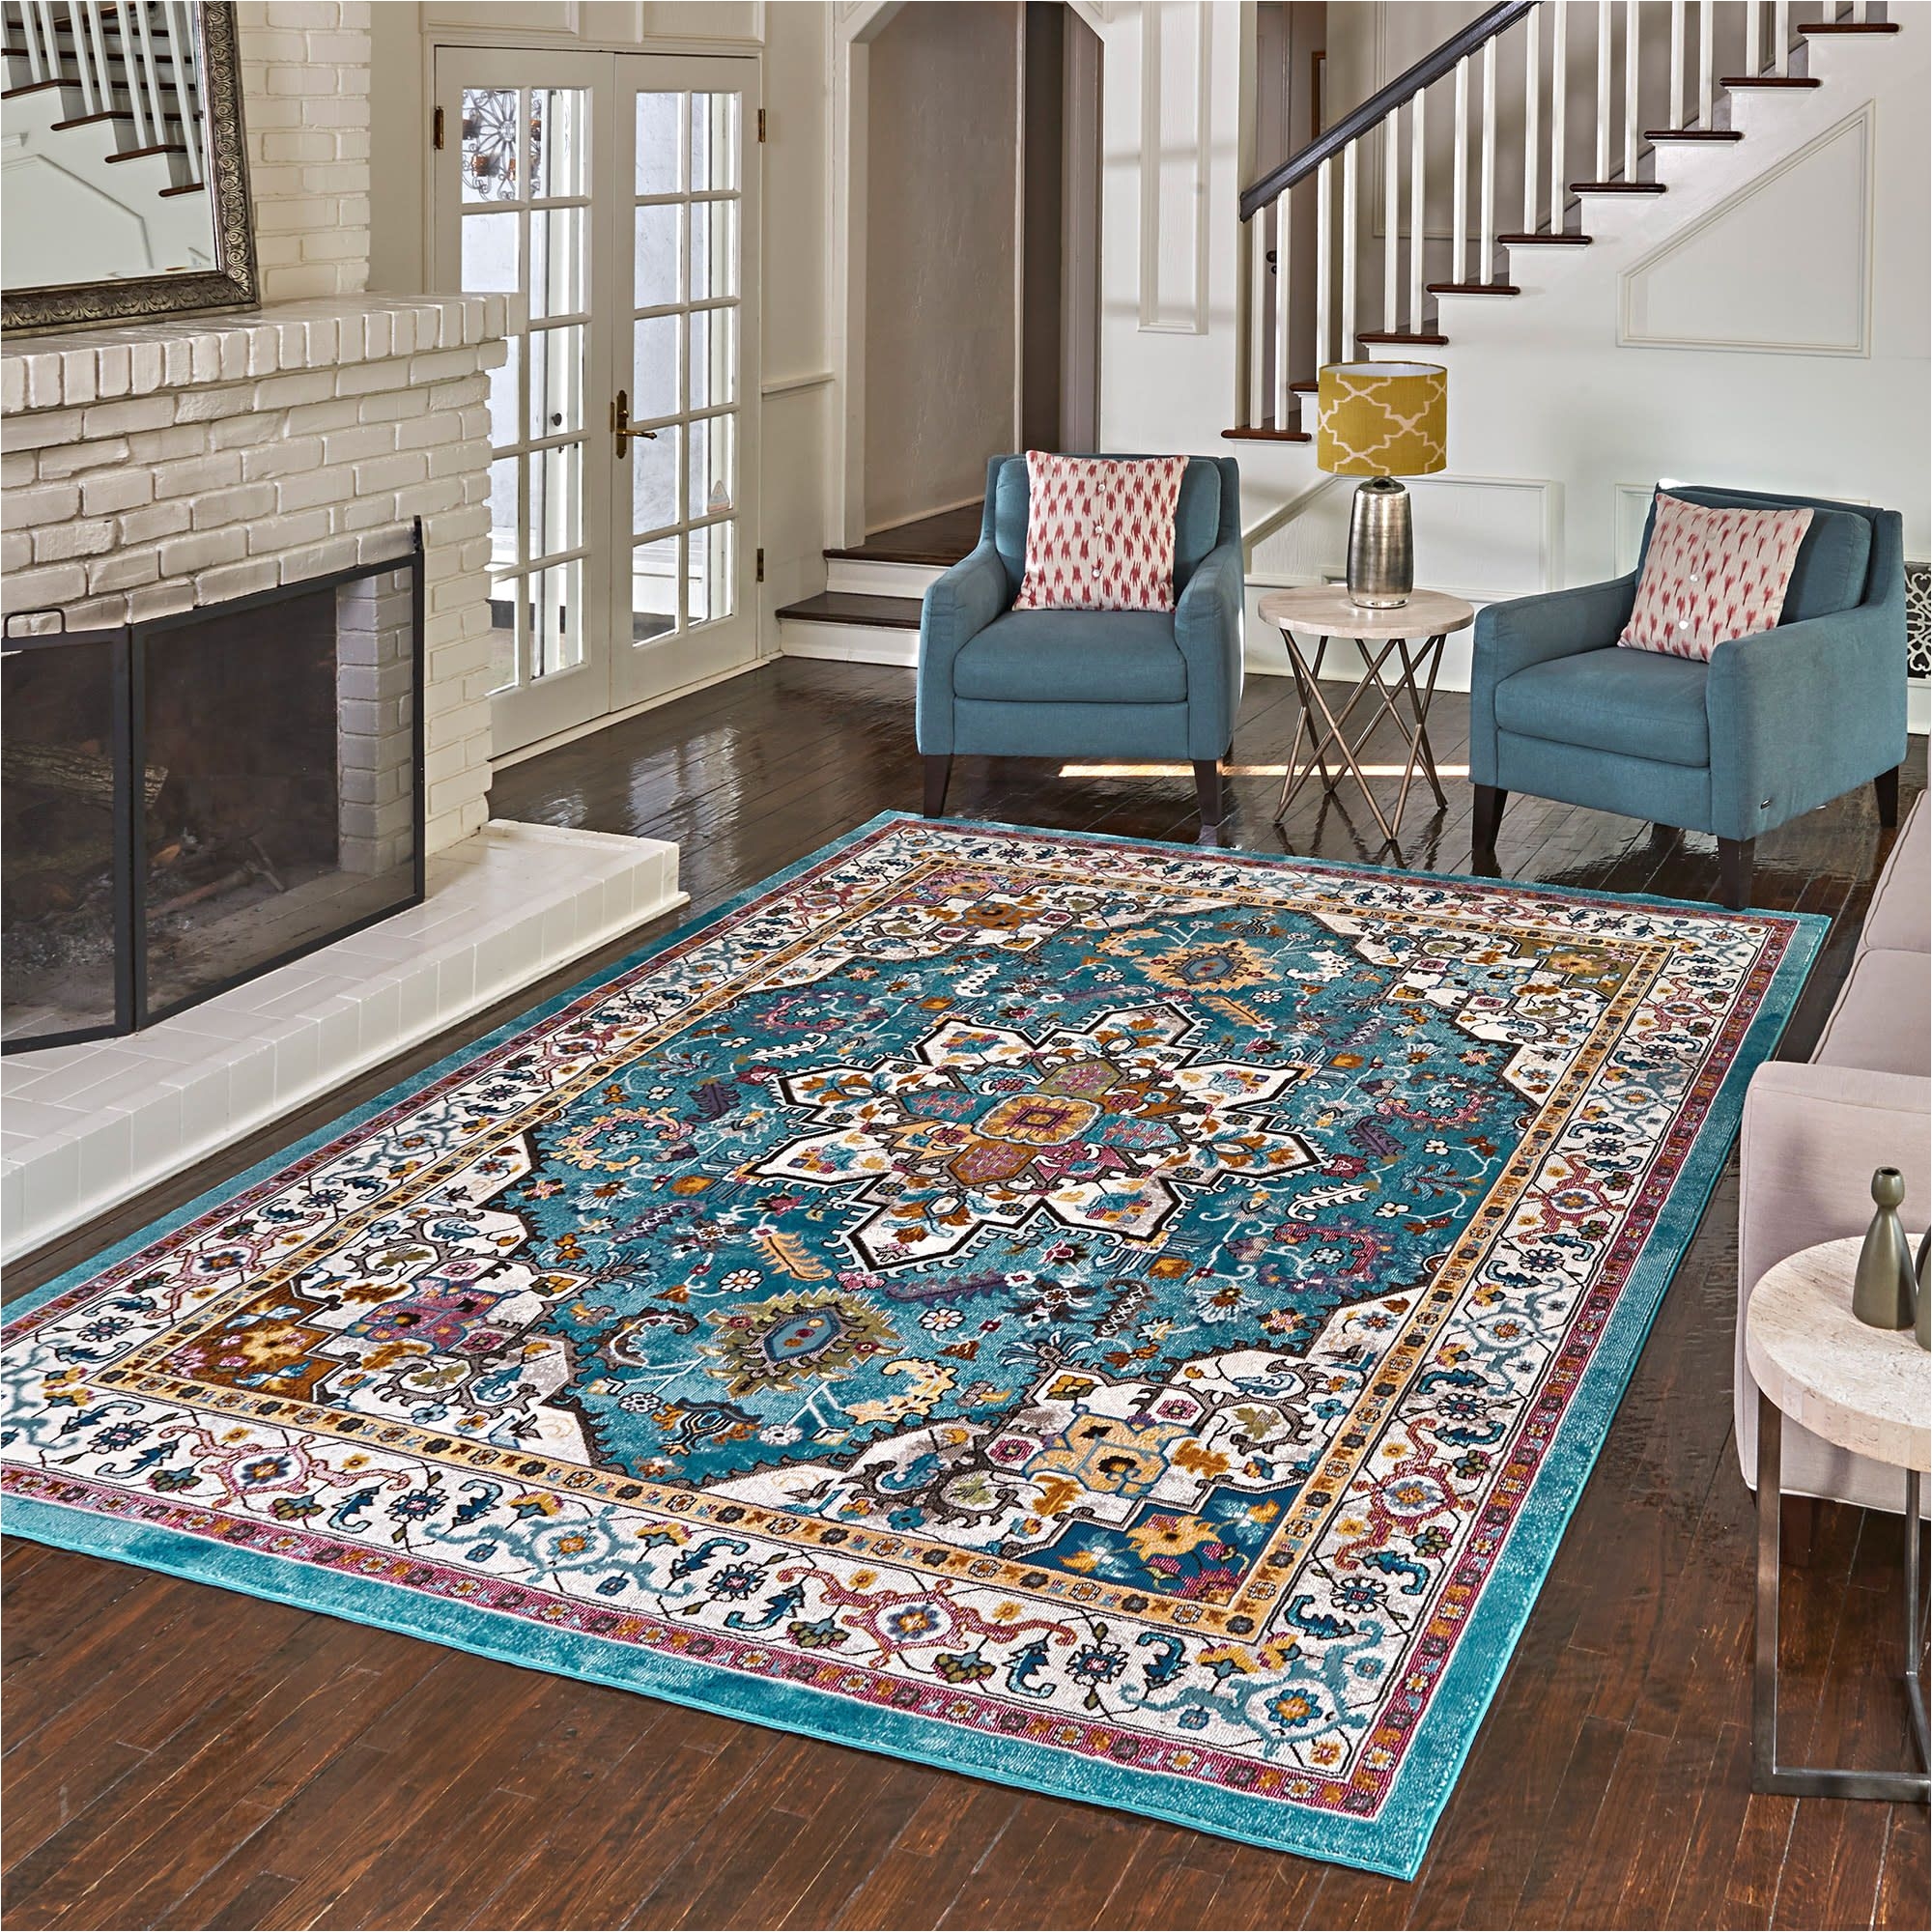 costco offers its members the carmen rug collection area rug in several sizes and styles